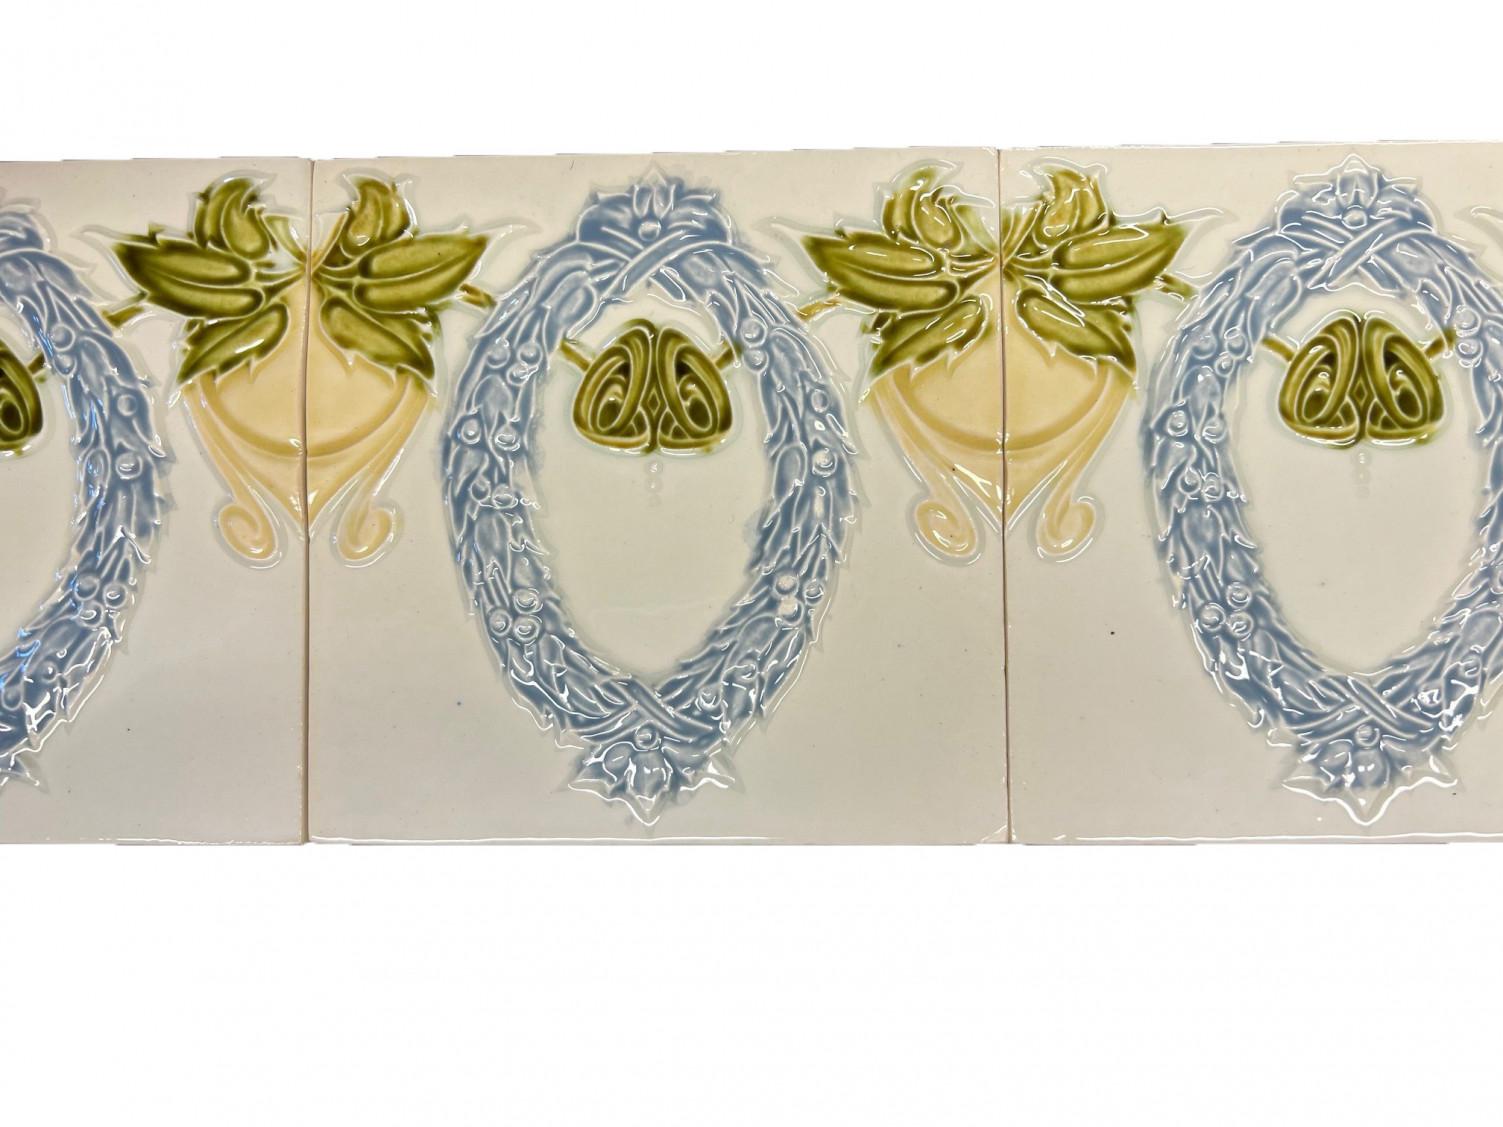 This is an amazing set of antique Art Nouveau handmade tiles with an image of a laurel wreath in relief in a soft blue, green and yellow. These tiles would be charming displayed on easels, framed or incorporated into a custom tile design.

Please